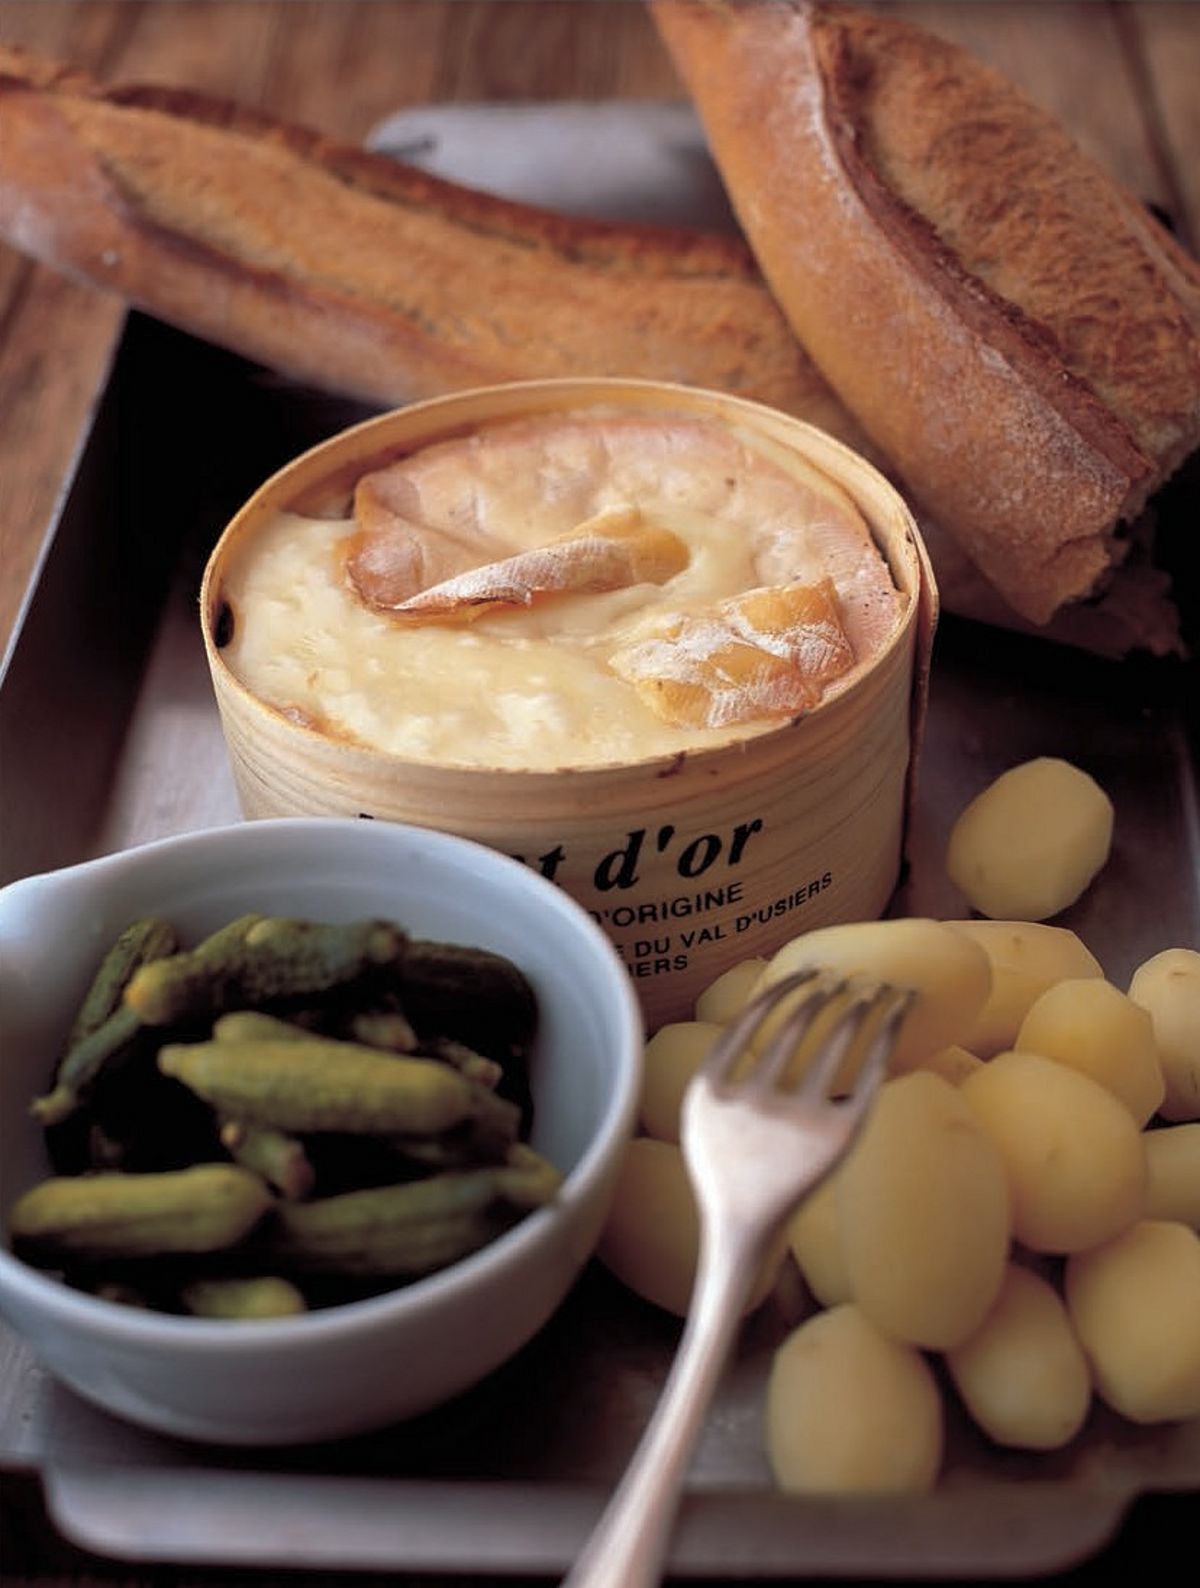 Baked Whole Vacherin Mont d’Or (with New Potatoes and Gherkins)